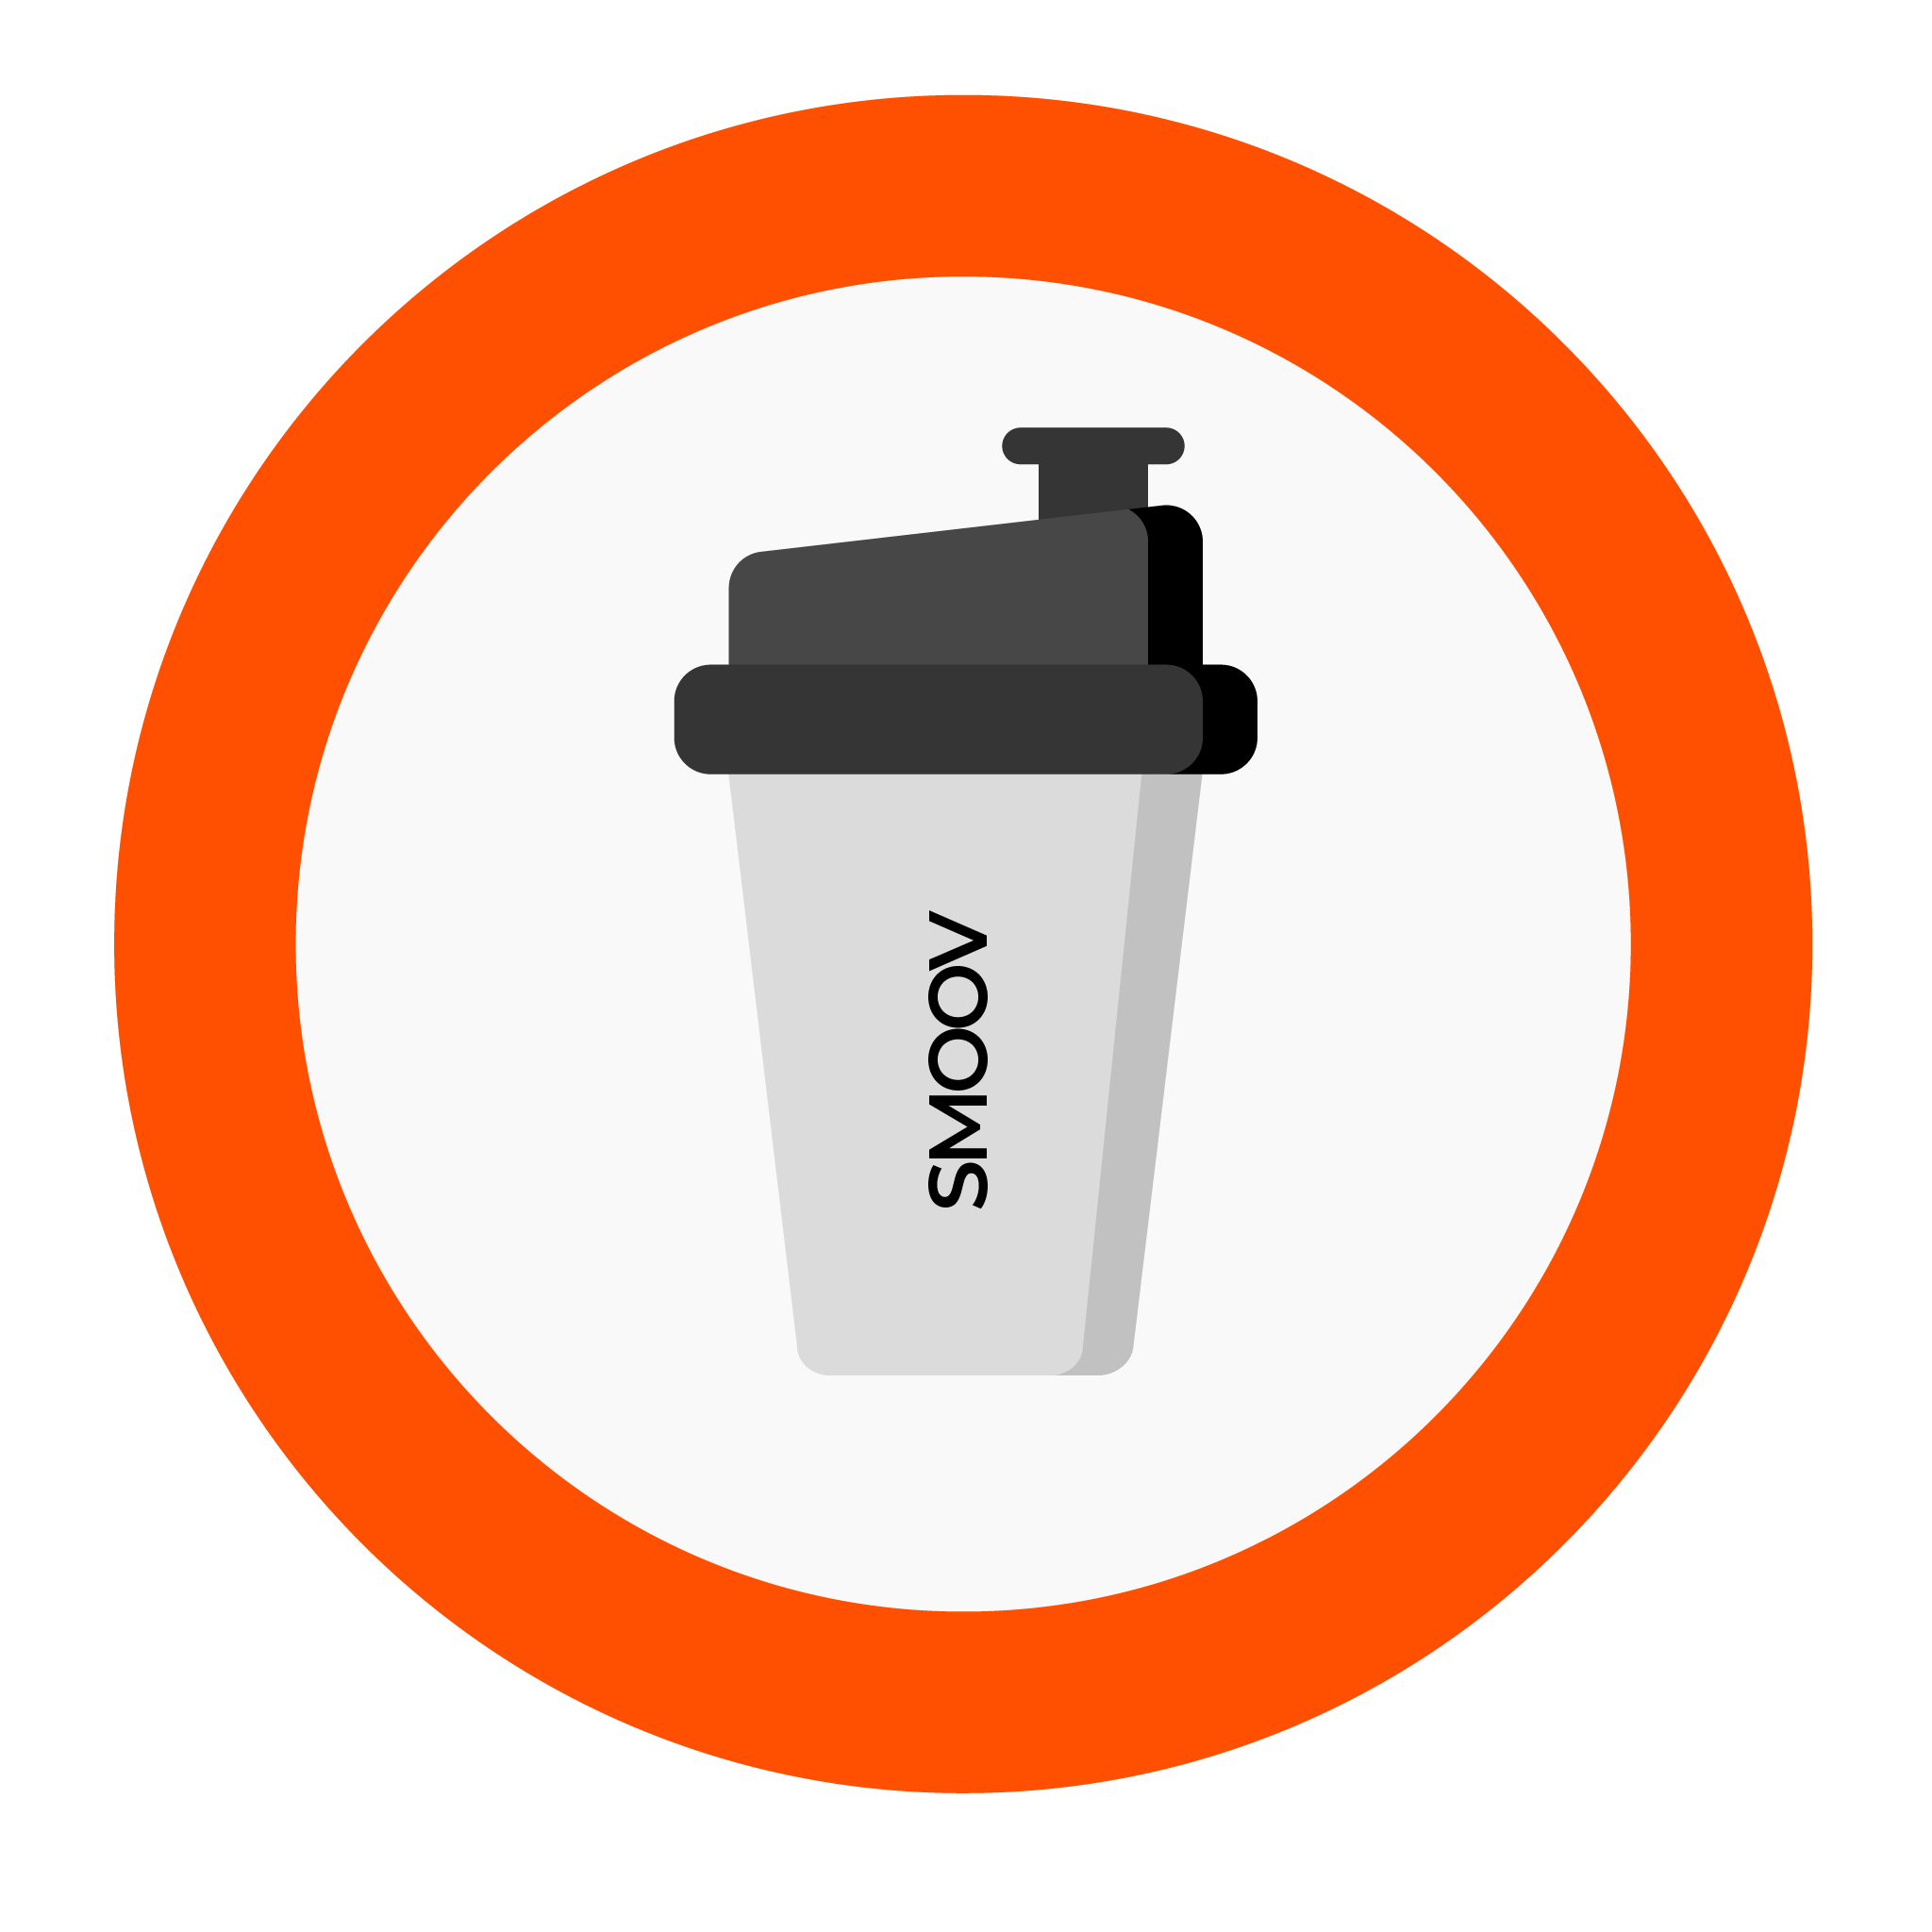 How to use Smoov Blends: Add 1-2 tsp(s) to water, nut milk or juice and shake. Quick way to get your nutrition. Perfect for on-the-go!